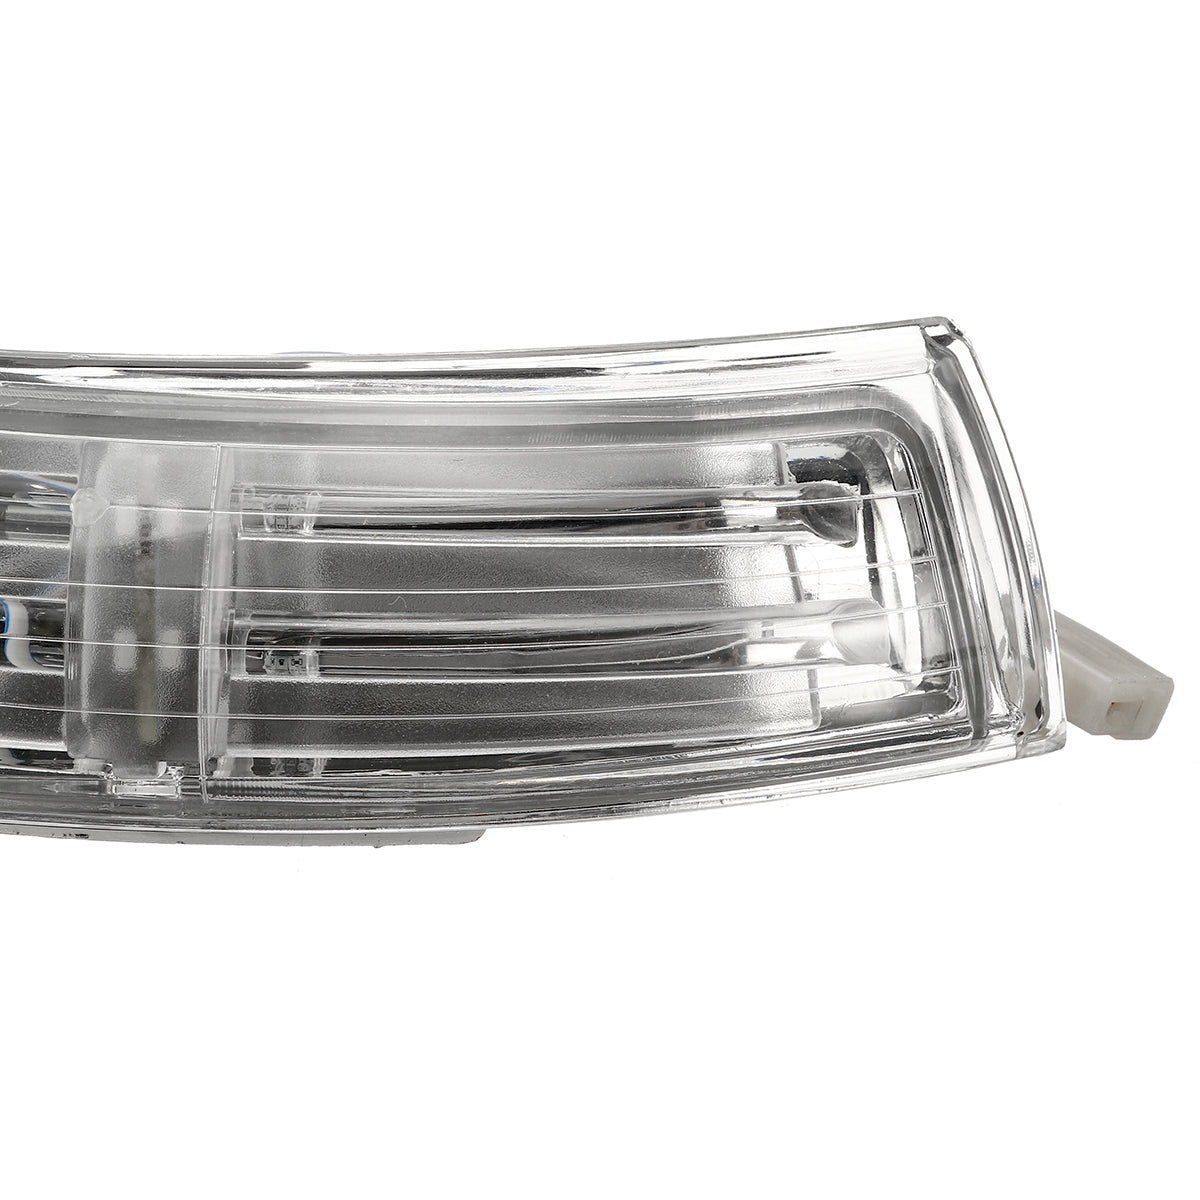 Dim Gray Side Rear View Mirror LED Turn Signal Lights Amber Left/Right for VW Touareg 2007-2011